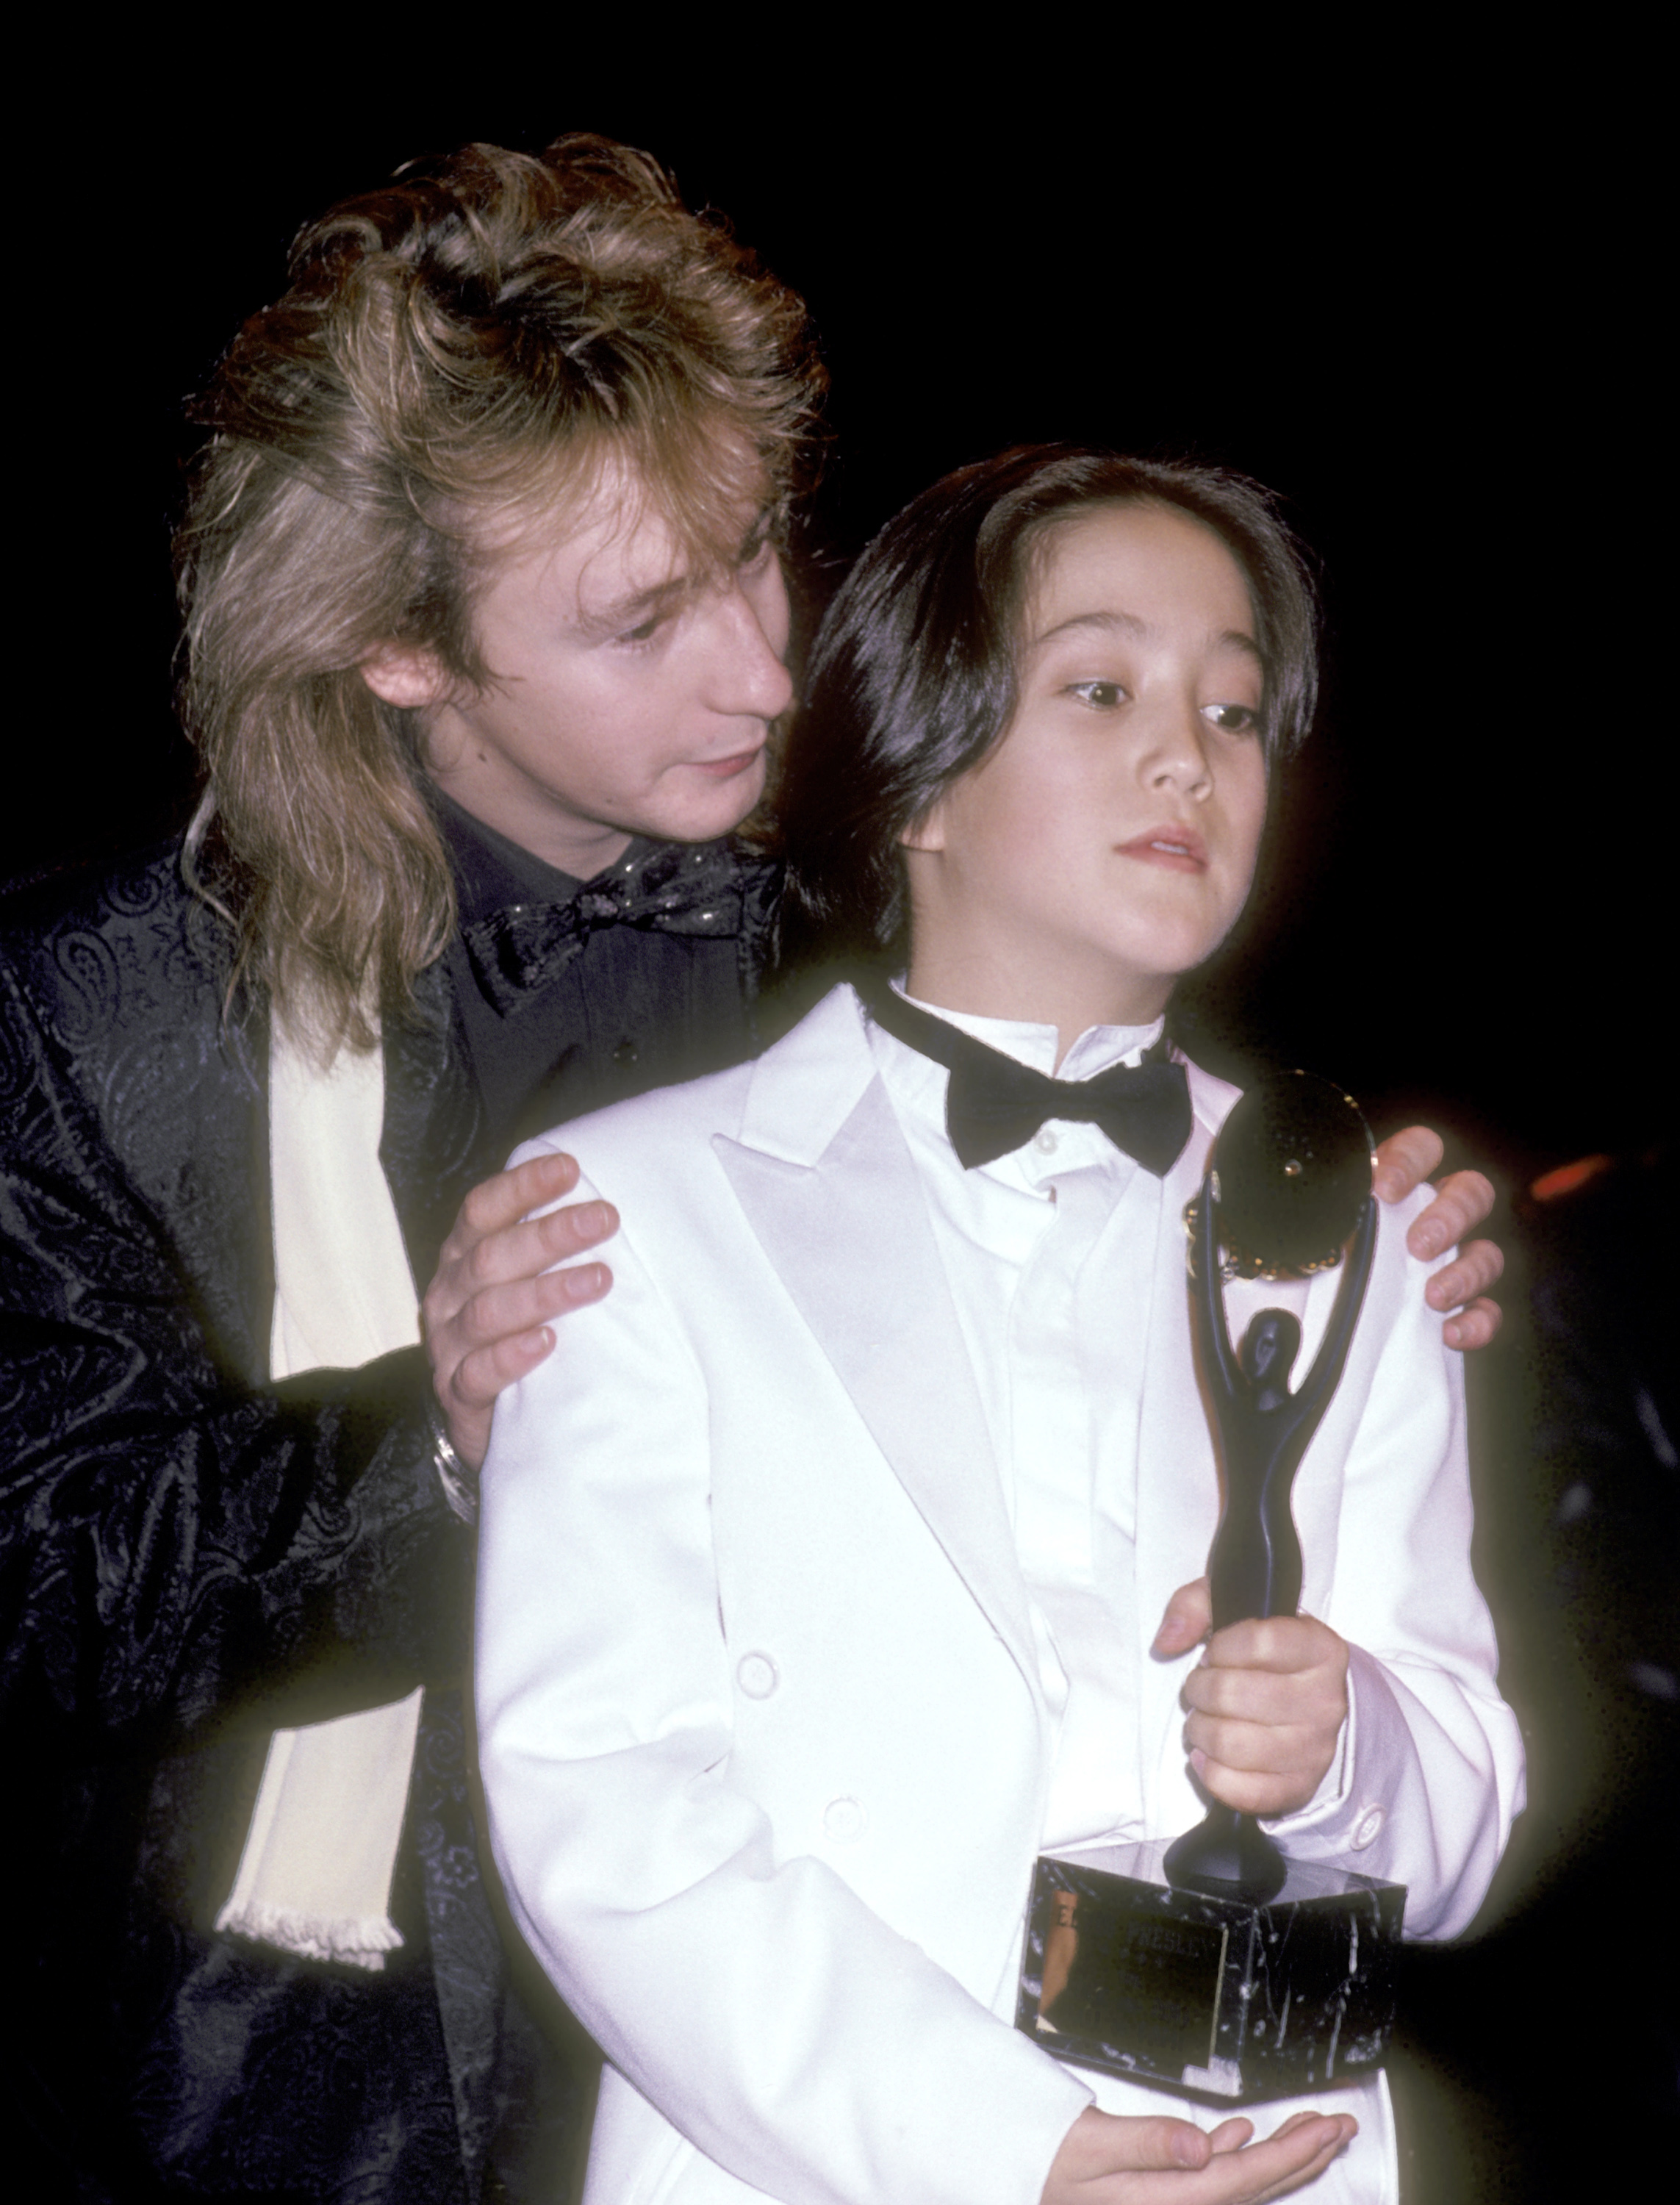 Julian Lennon and Sean Lennon in New York in 1984 | Source: Getty Images